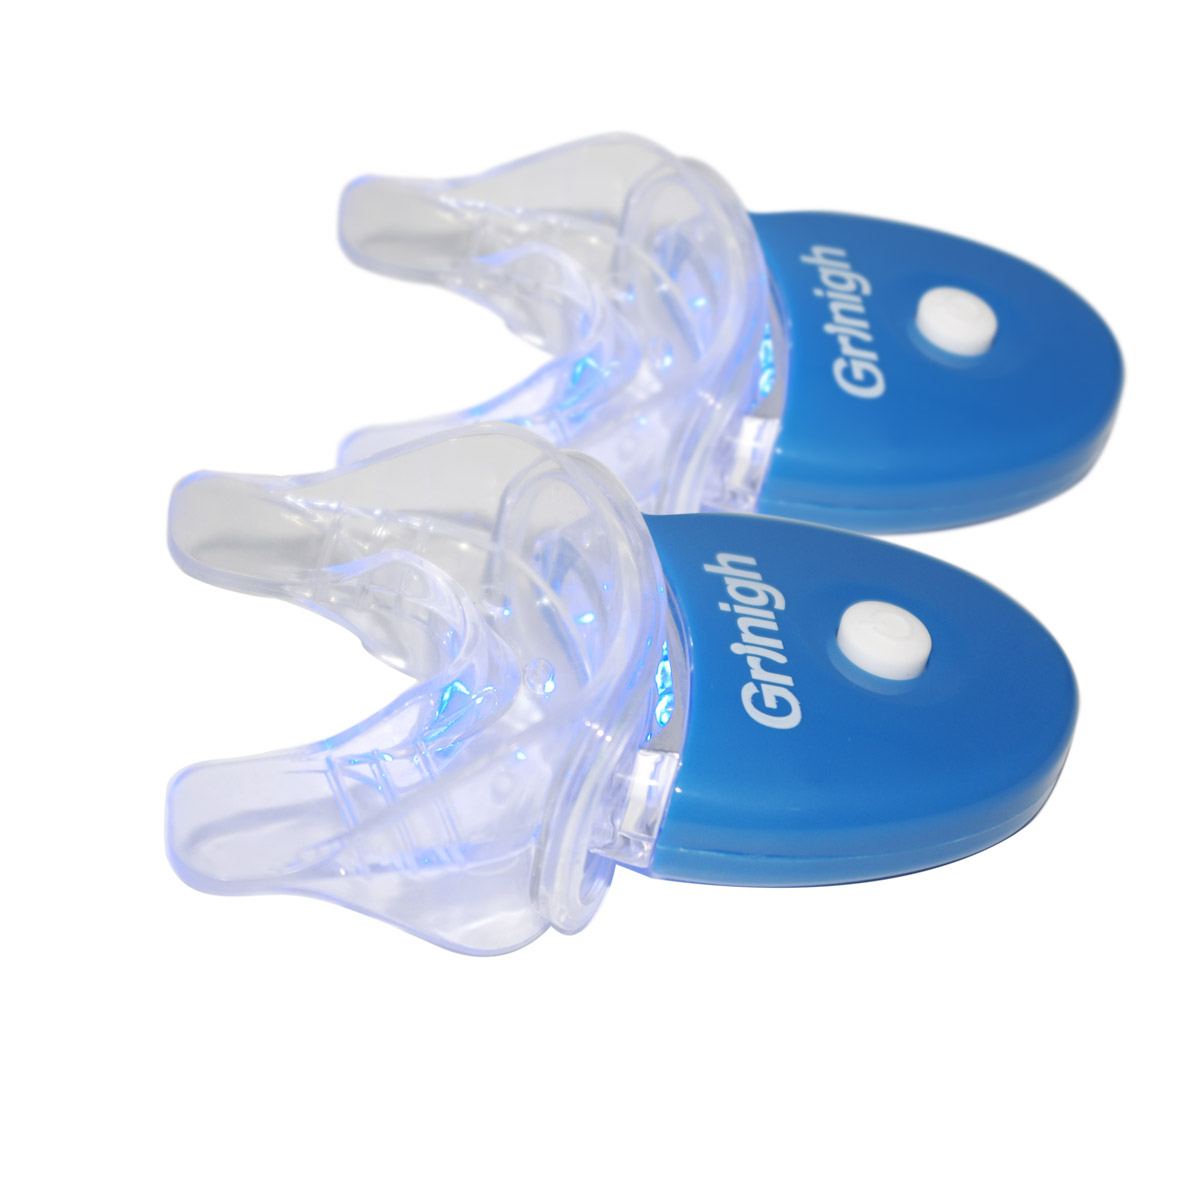 Grin365 2 Sets Mini Dental LED White Light and Matched Mouth Tray for Home Teeth Whitening System CE Approved